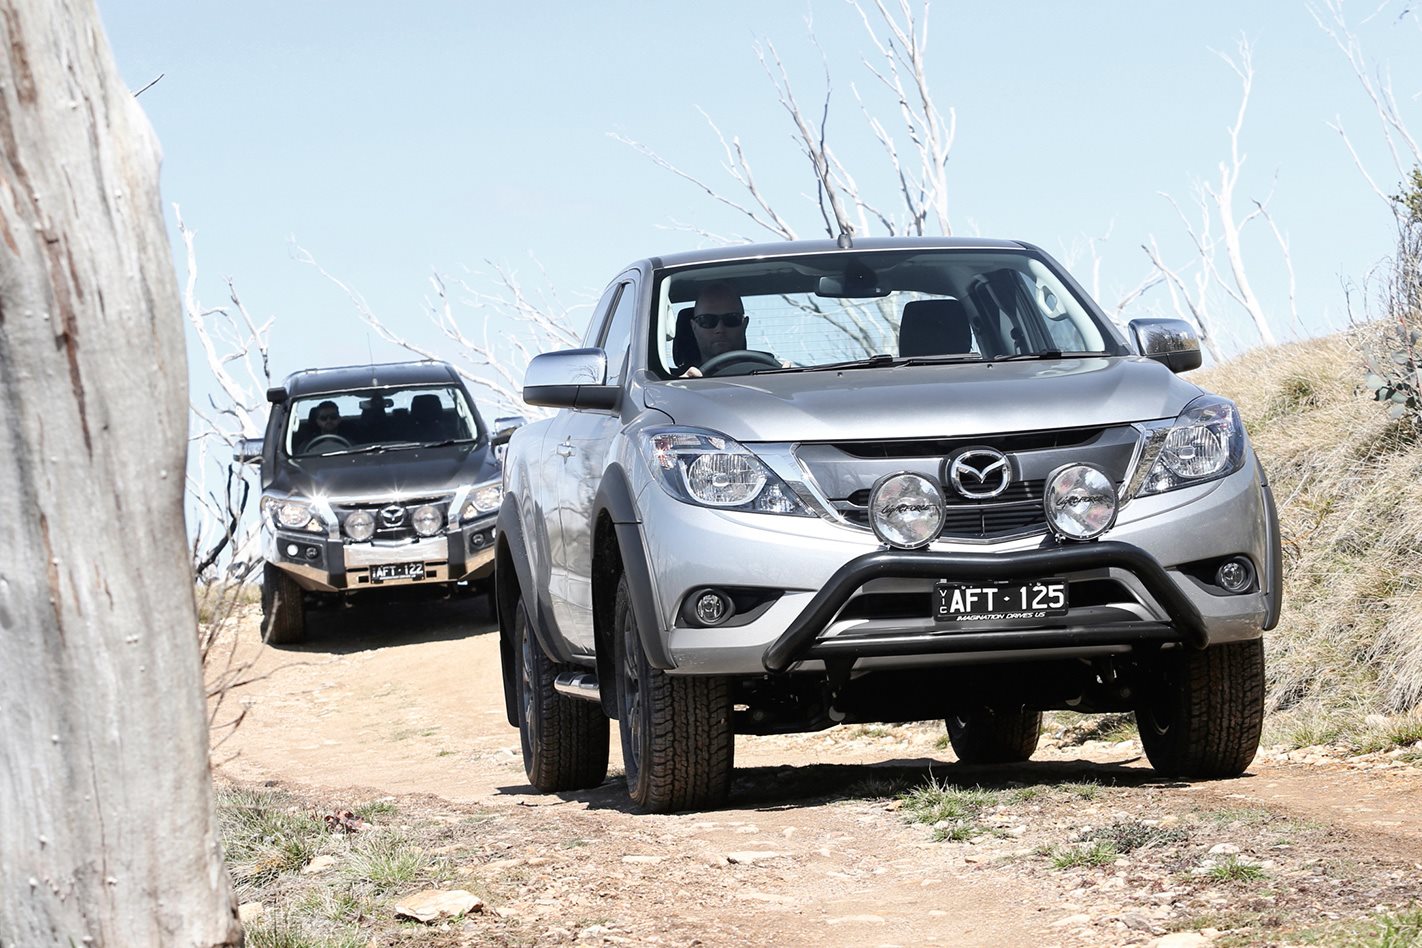 Learning to drive a Mazda BT-50 4x4 off-road on Fraser Island